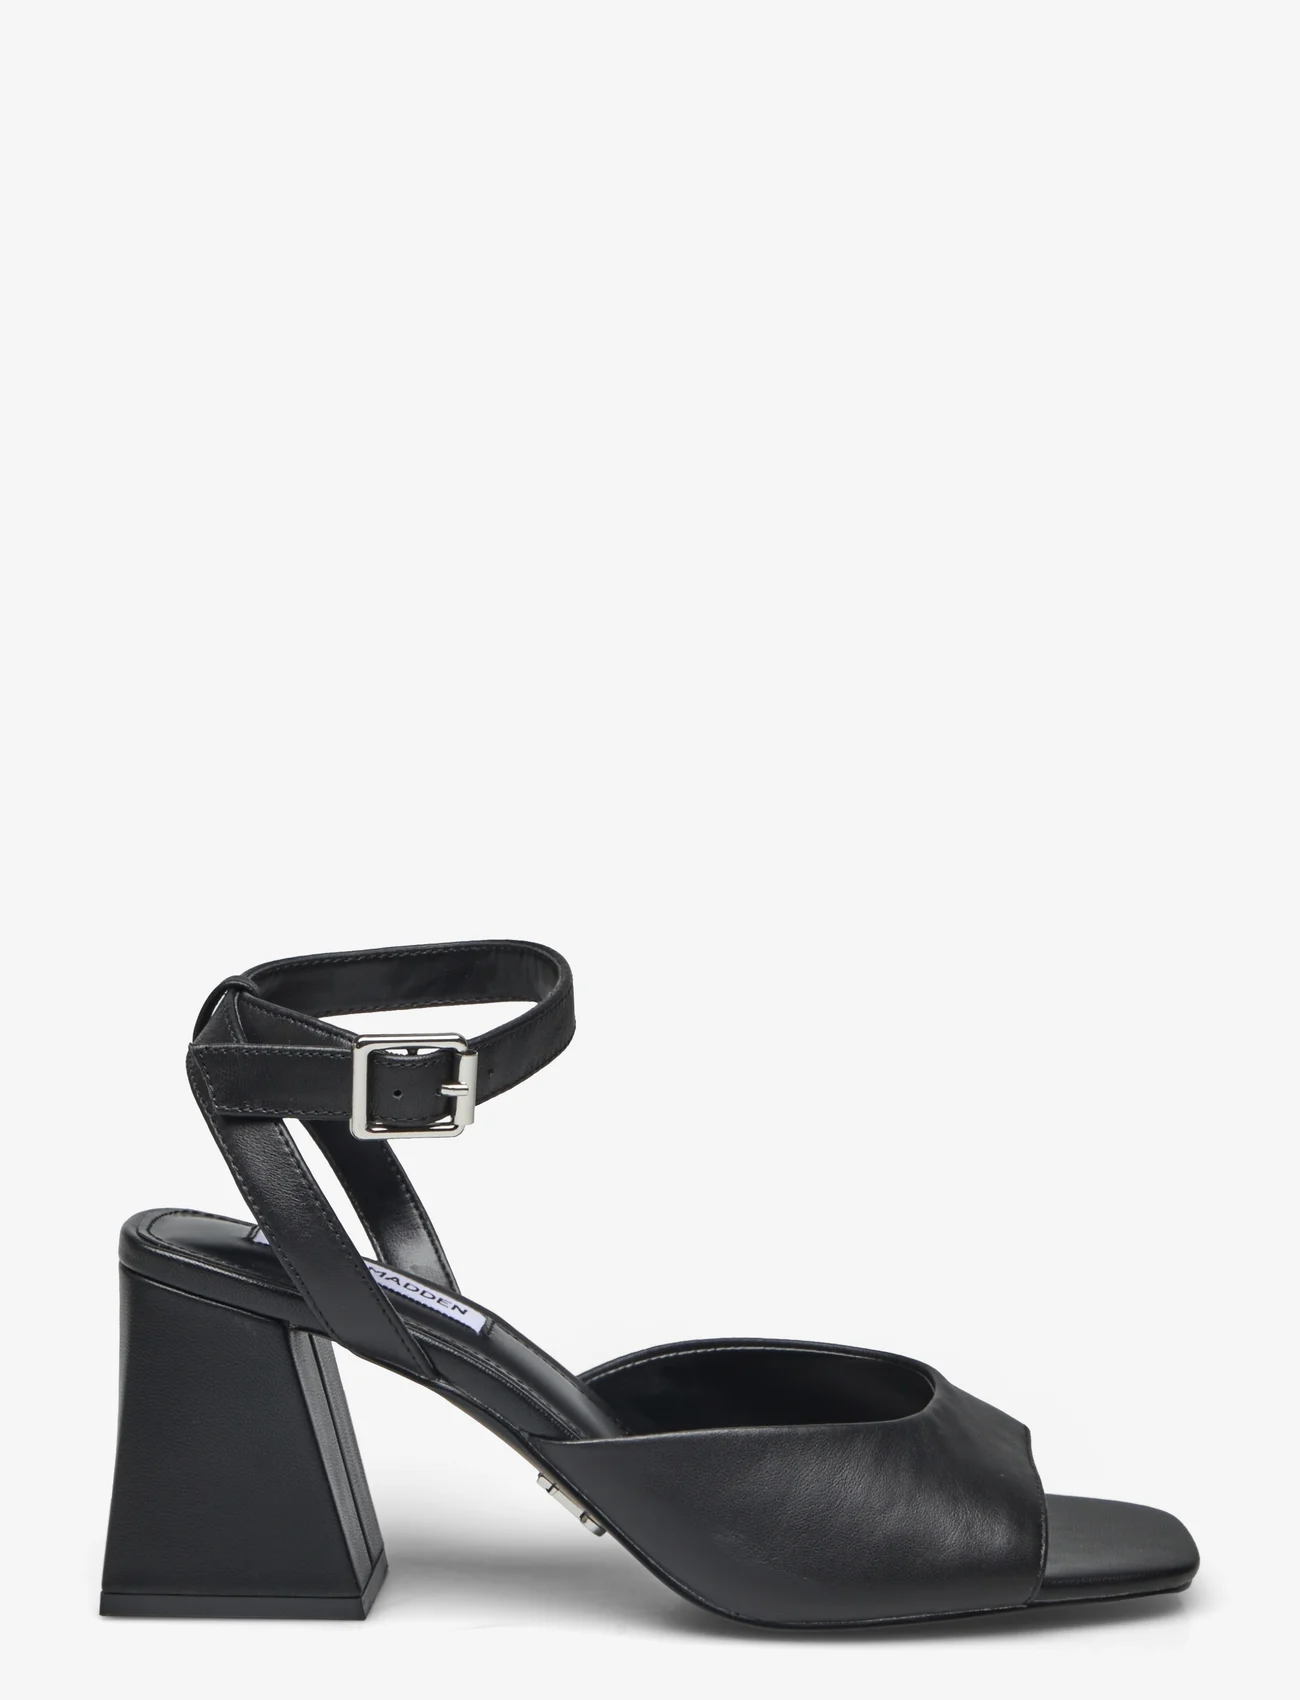 Steve Madden - Glisten Sandal - party wear at outlet prices - black leather - 1